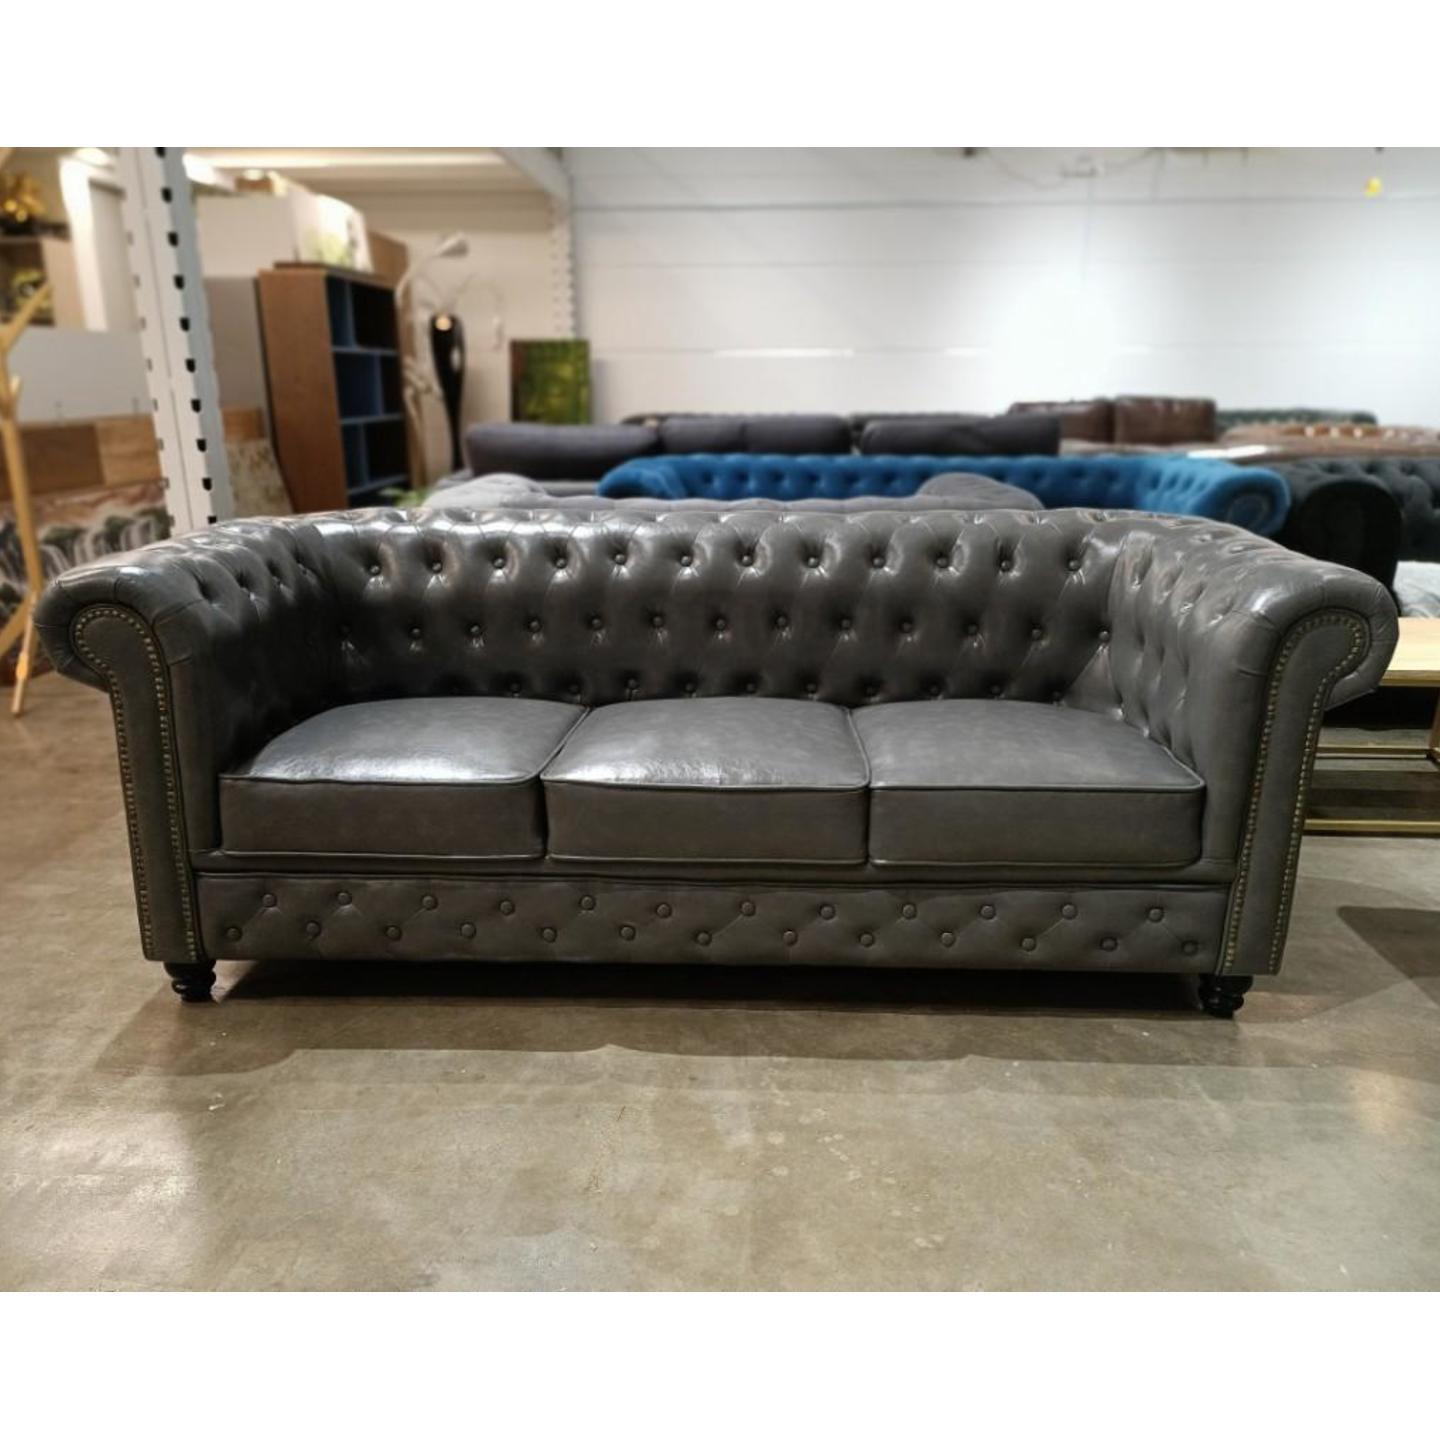 PRE ORDER SALVADORE X 3 Seater Chesterfield Sofa in NARDO GREY PU - ESTIMATED DELIVERY BY END OF JUNE 2022